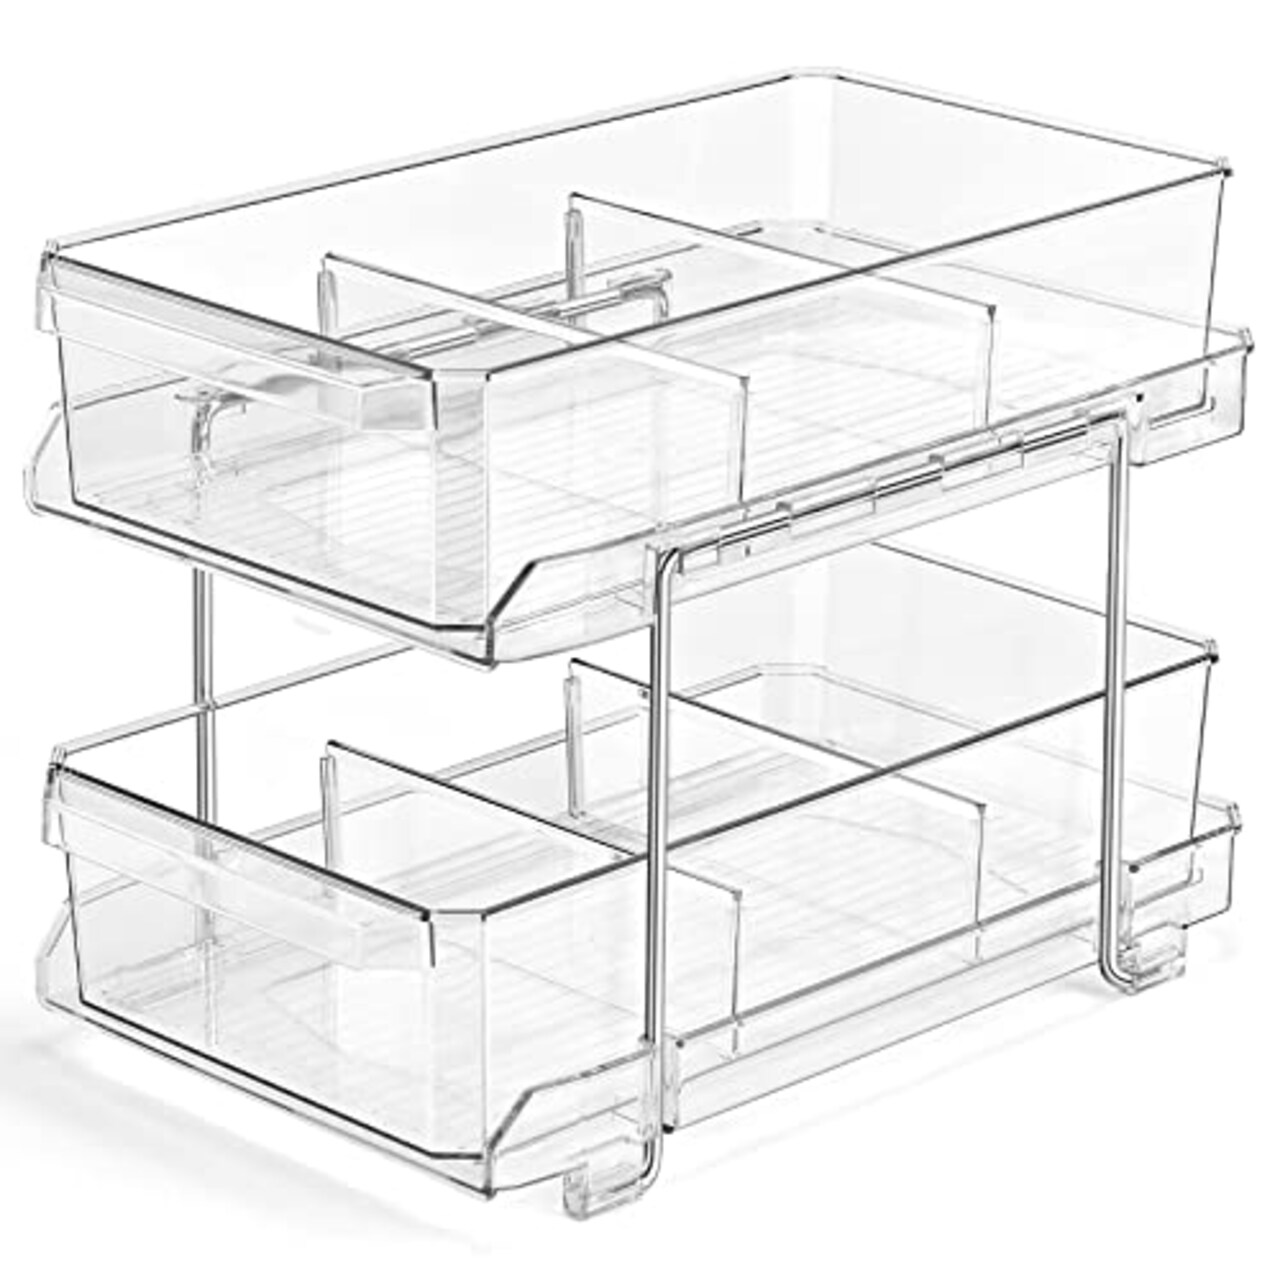 2 Tier Clear Organizer with Dividers for Cabinet / Counter, MultiUse  Slide-Out Storage Container - Kitchen, Pantry, Medicine Cabinet Storage  Bins - Bathroom, Vanity Makeup, Under Sink Organizing Tray